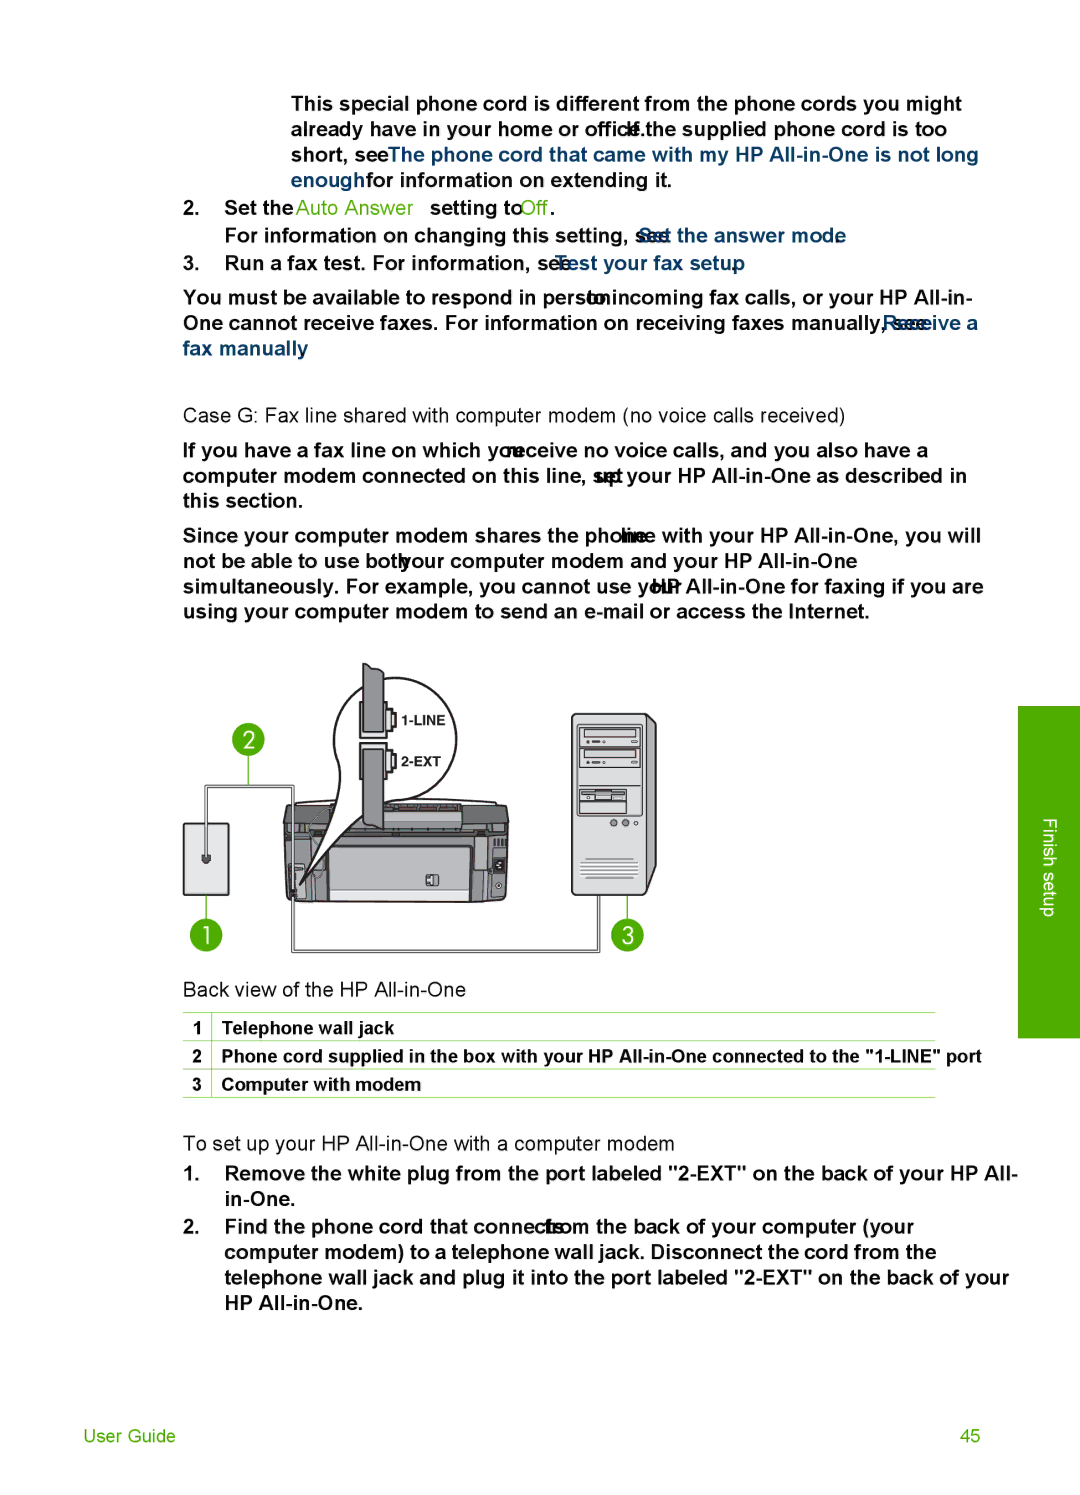 HP 3300 manual To set up your HP All-in-One with a computer modem 